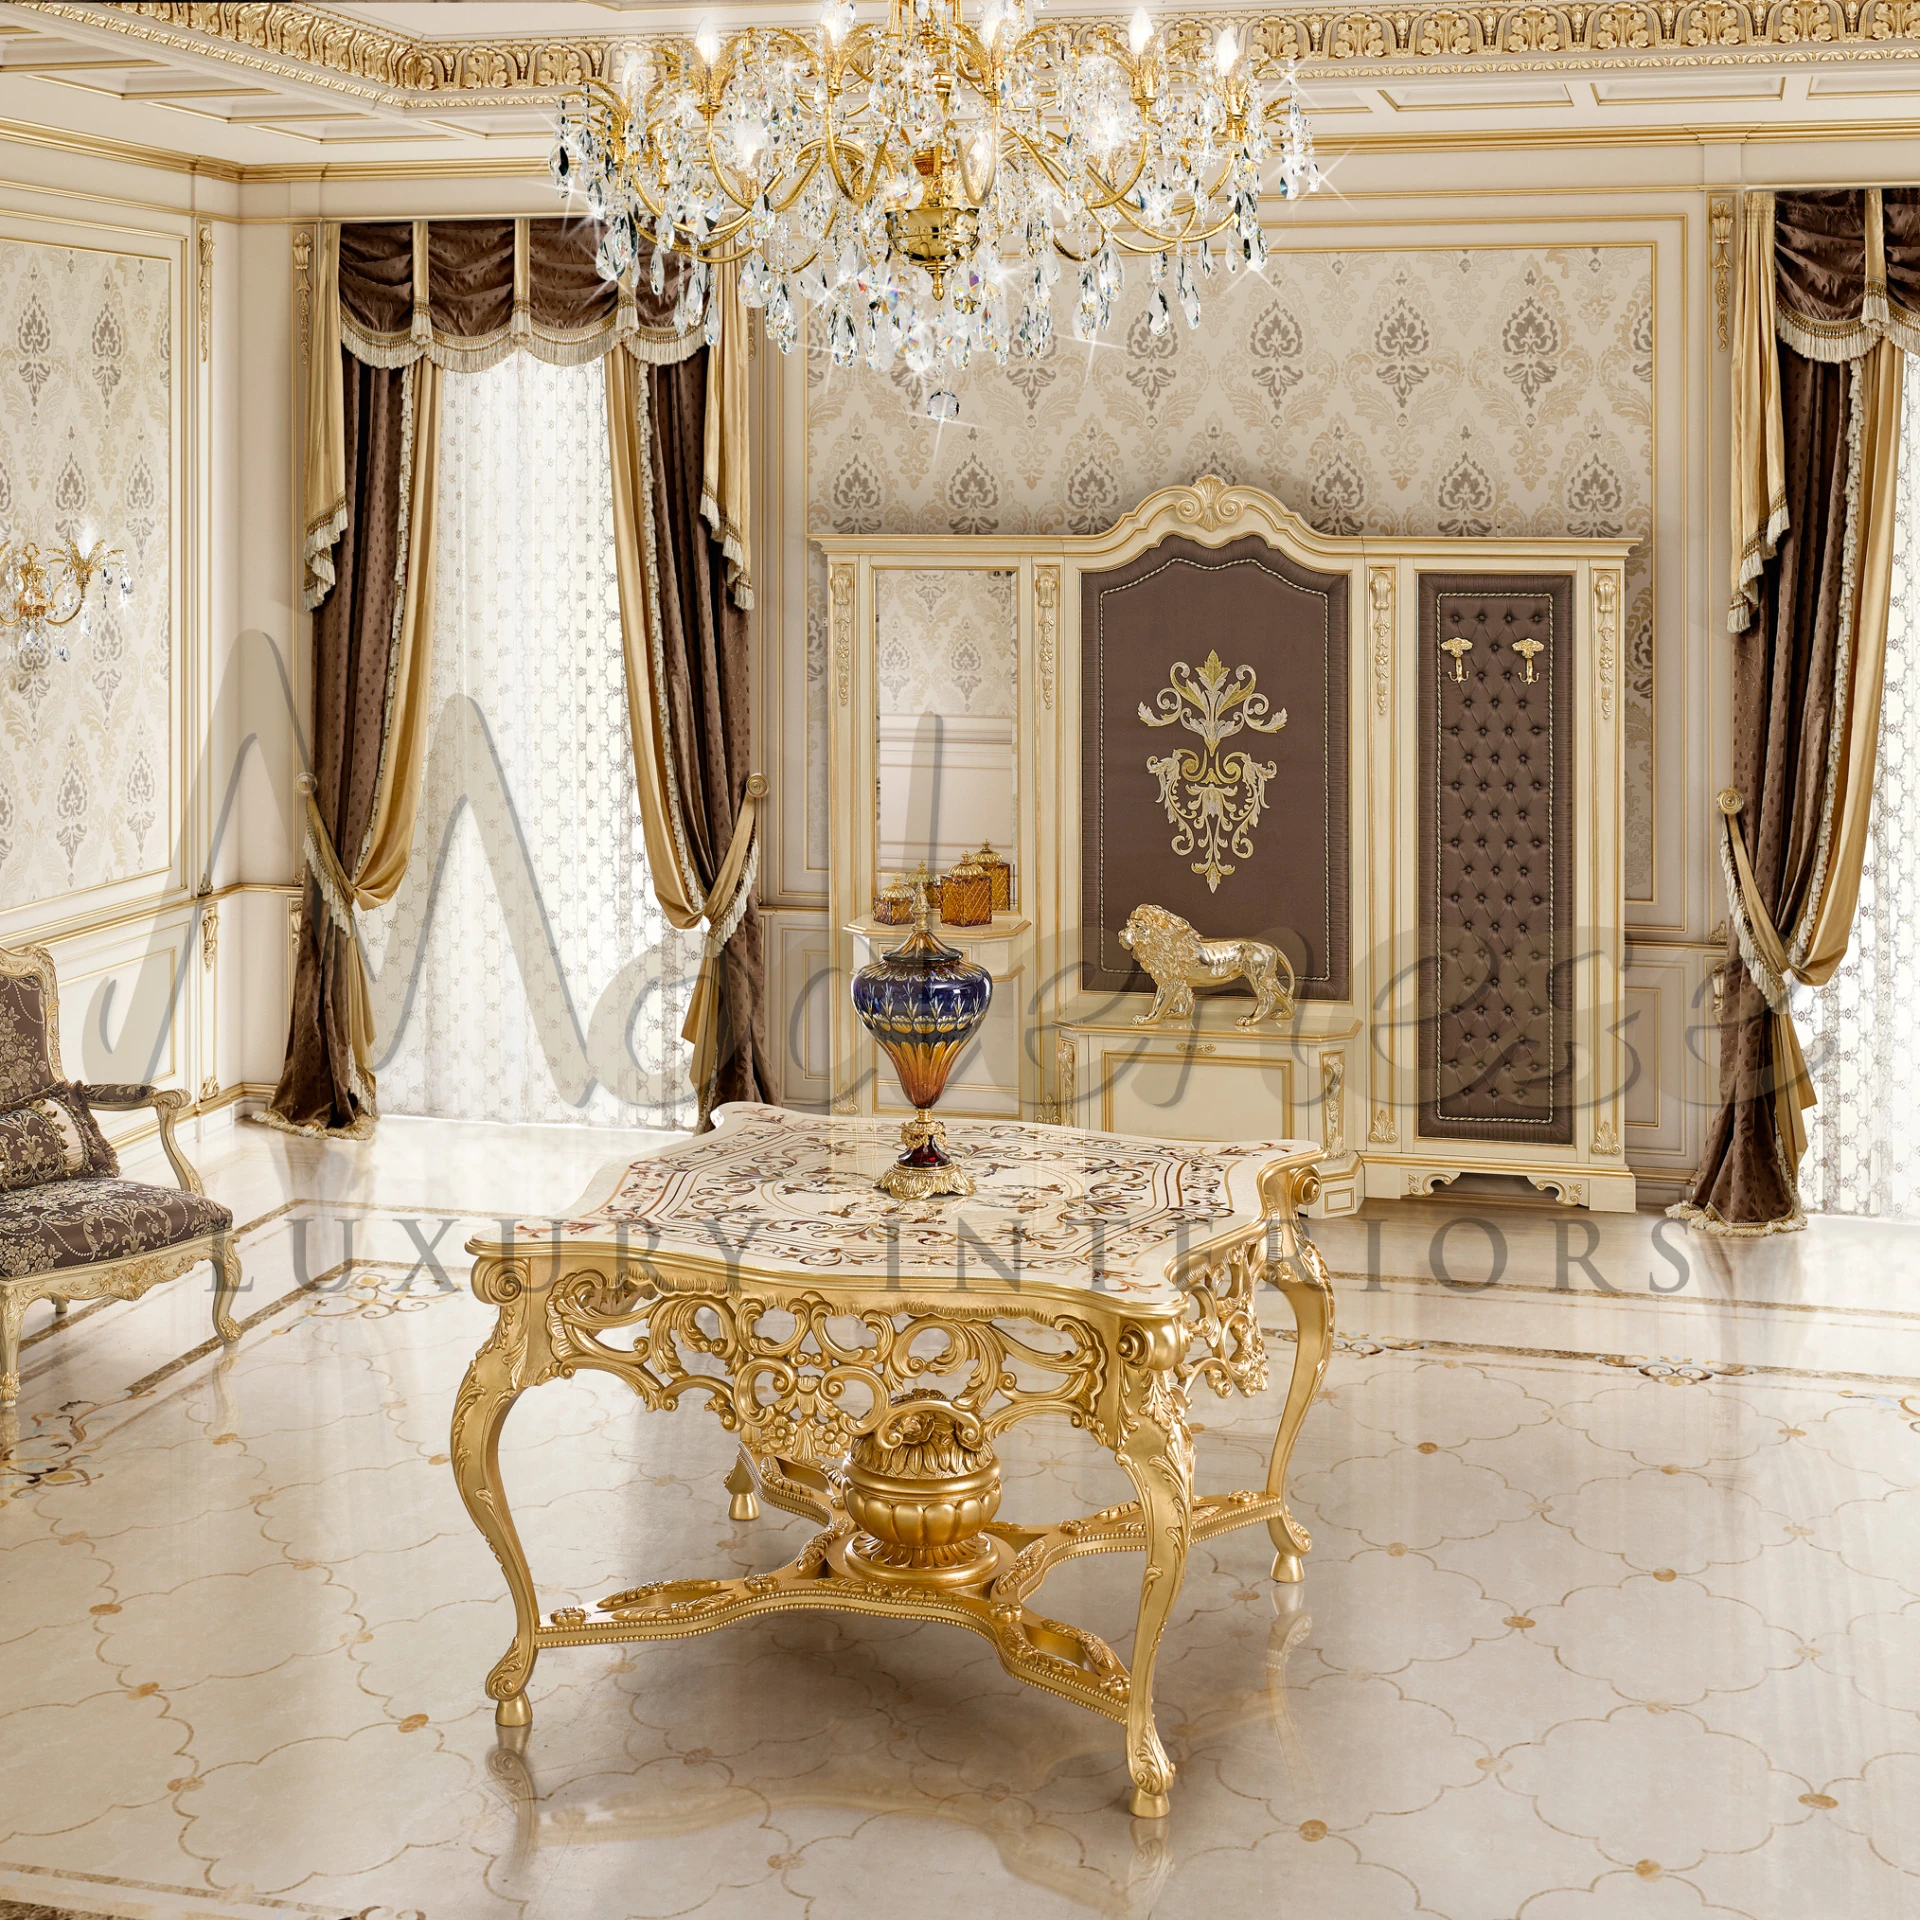 Opulent Classic Style Central Table with Italian design influences, showcasing gold leaf details for a grand classic interior.

